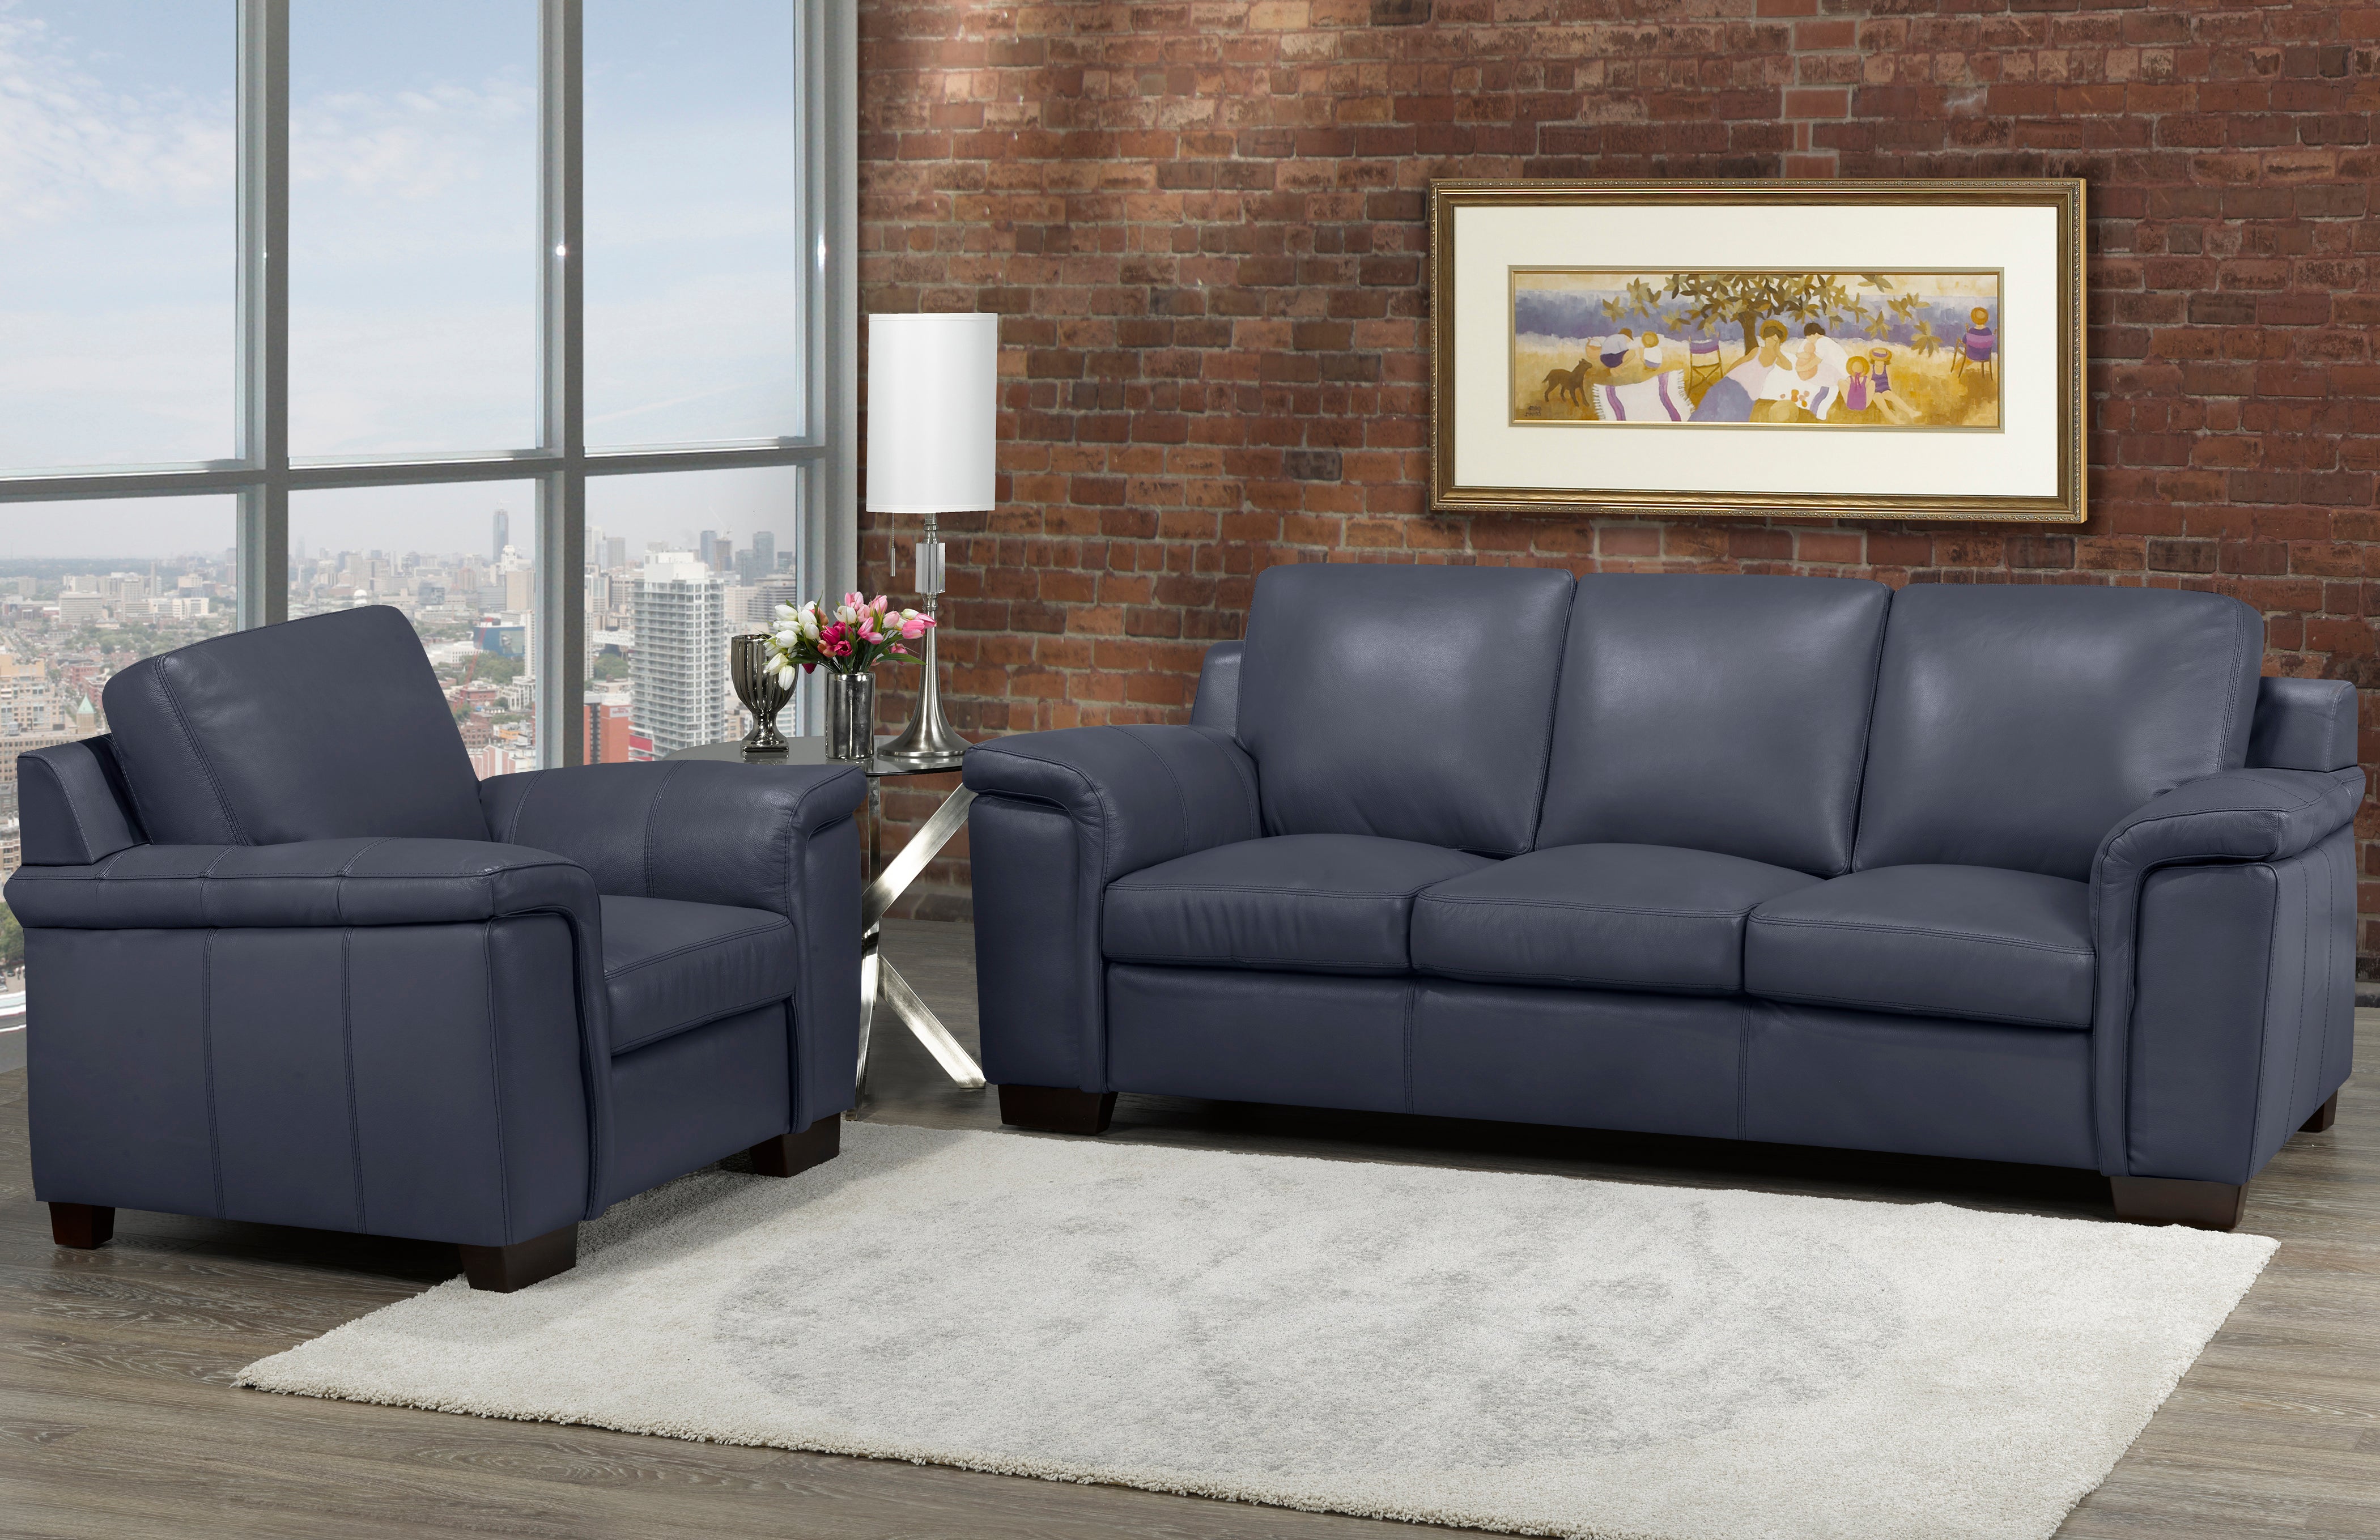 Melville Sofa - Navy Genuine Leather - Canadian Furniture